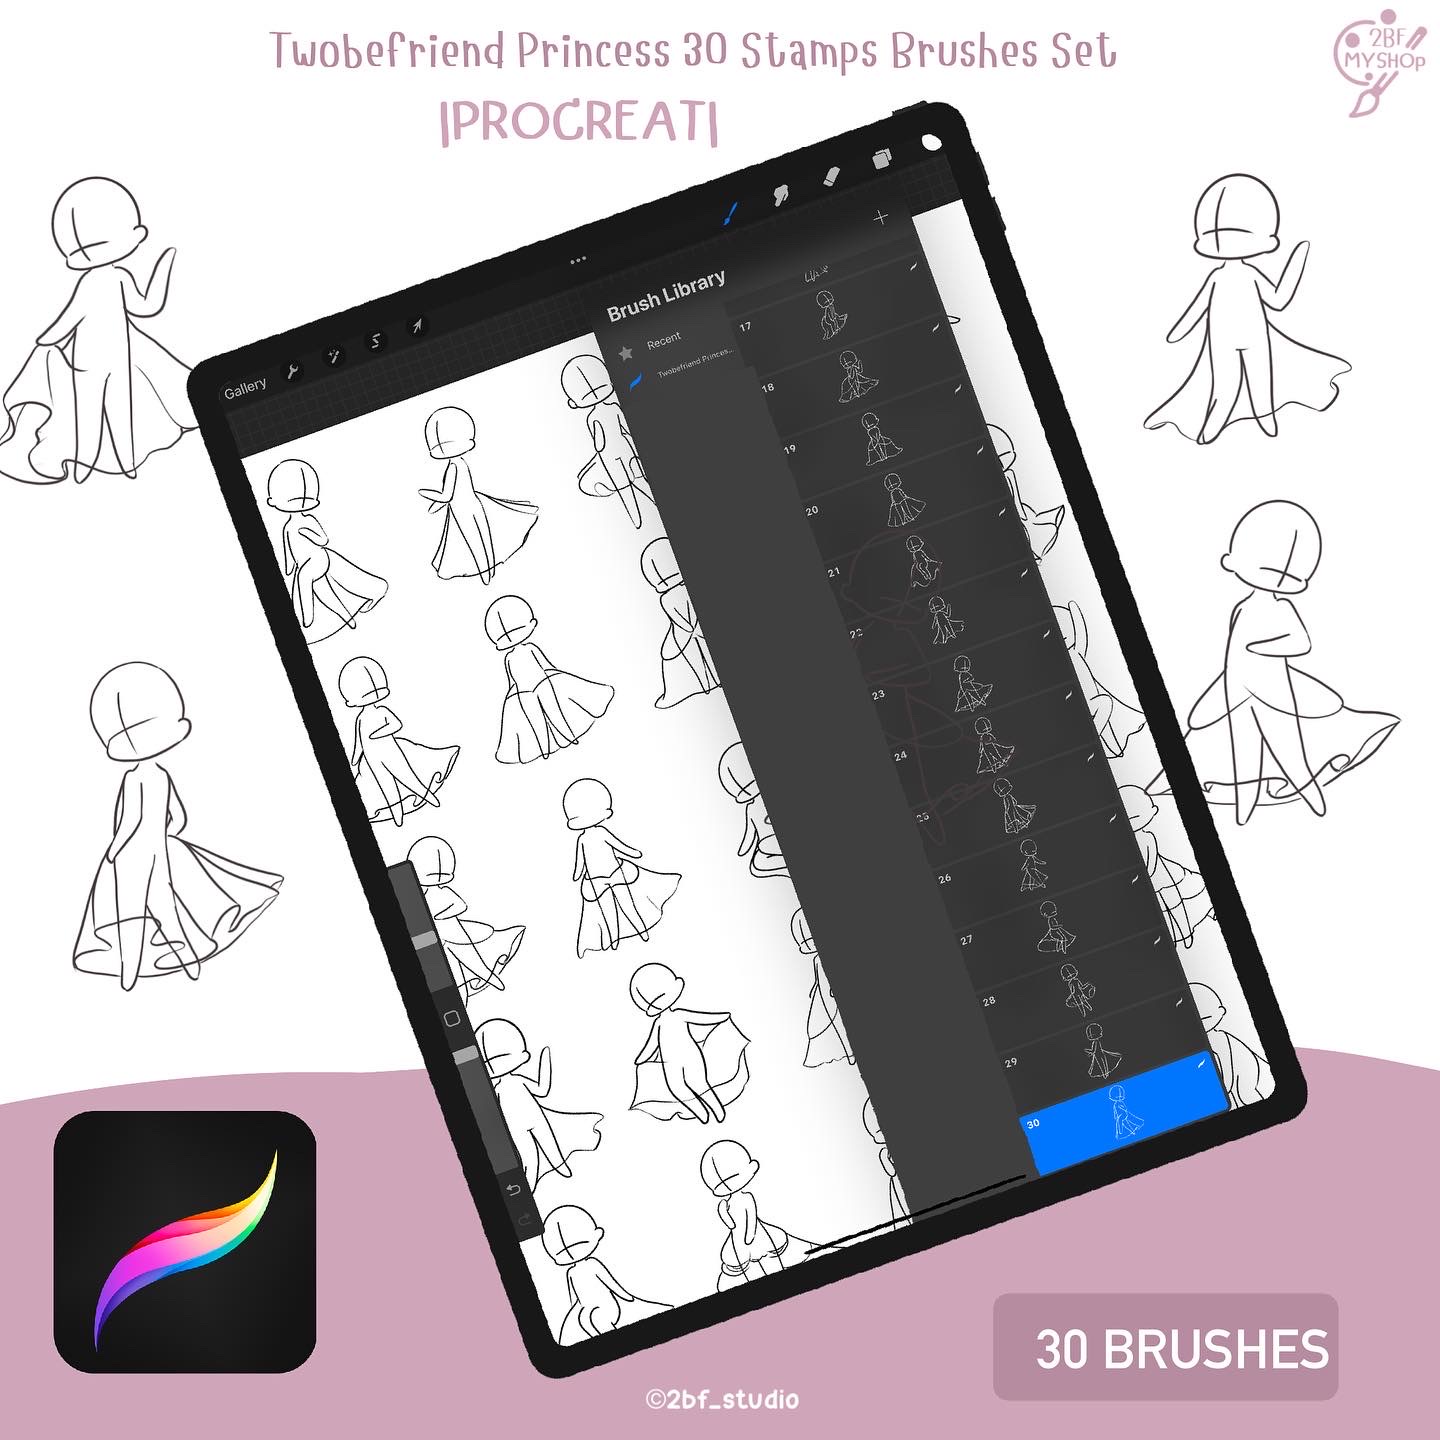 Two Twobefriend Princess 30 Stamps Brushes Set   |PROCREAT BRUSHED|